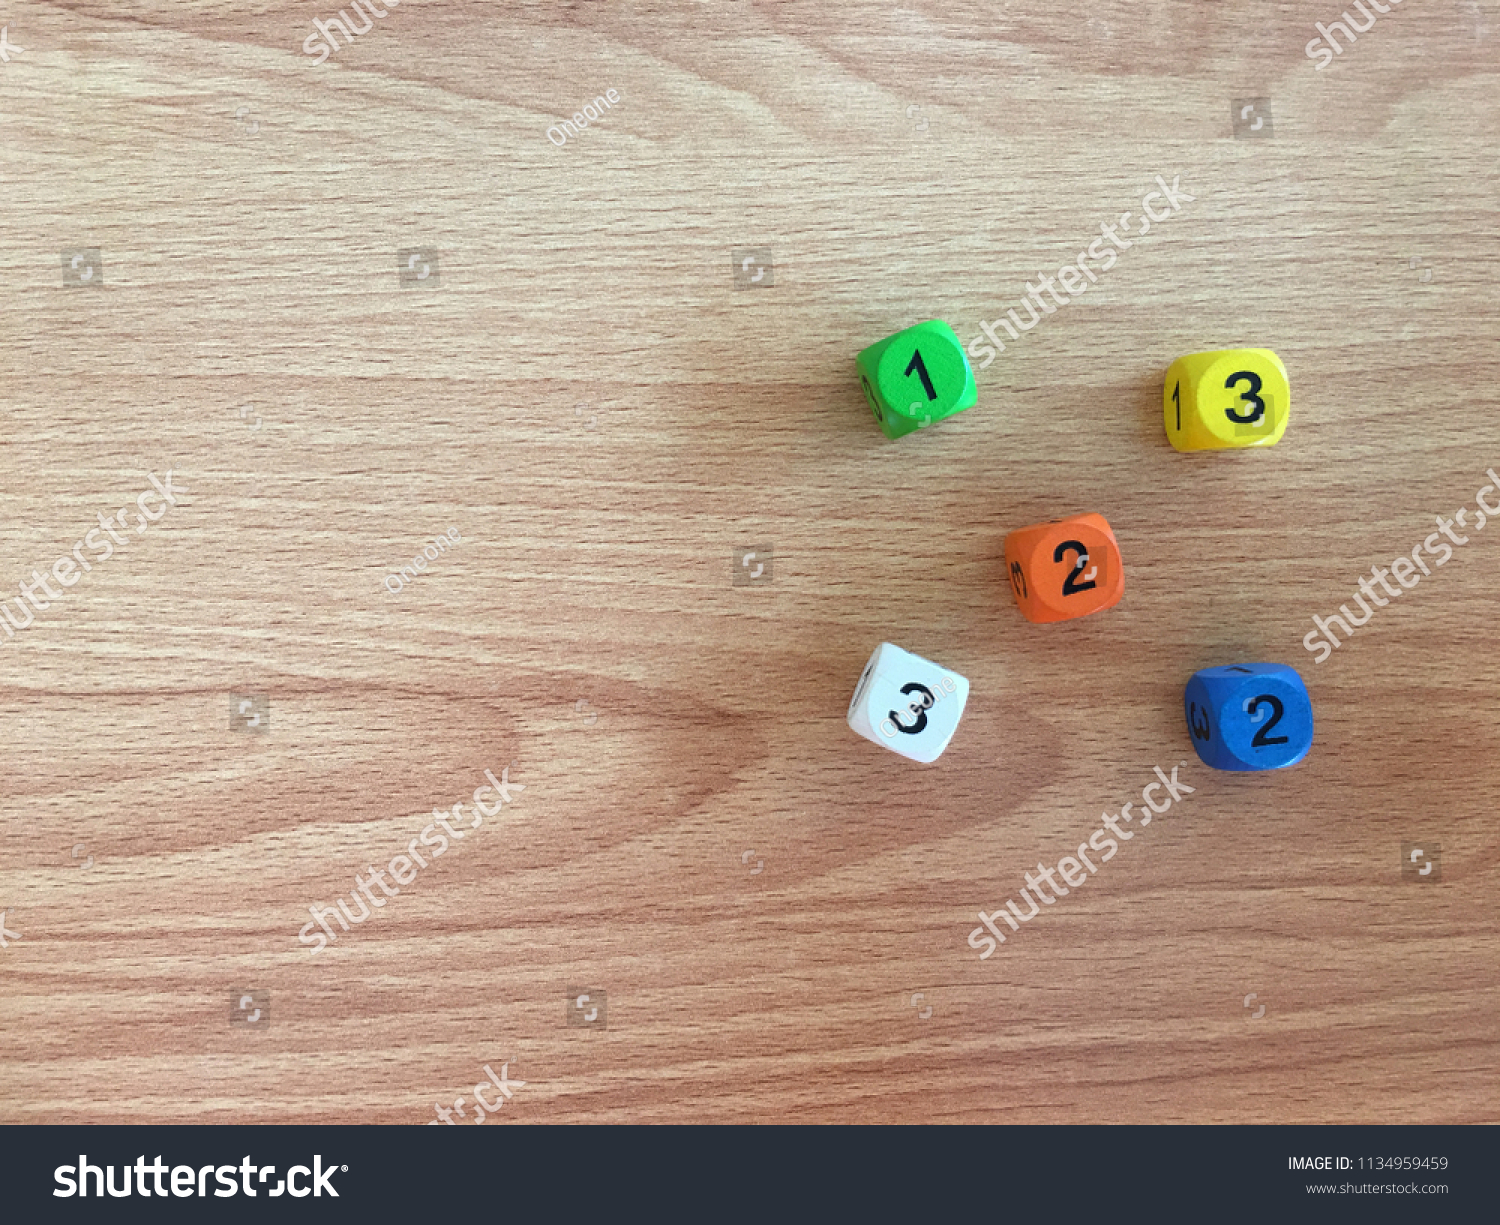 white, yellow, orange, green,blue dics on wooden table from above. Gambling devices. Game of chance concept. #1134959459